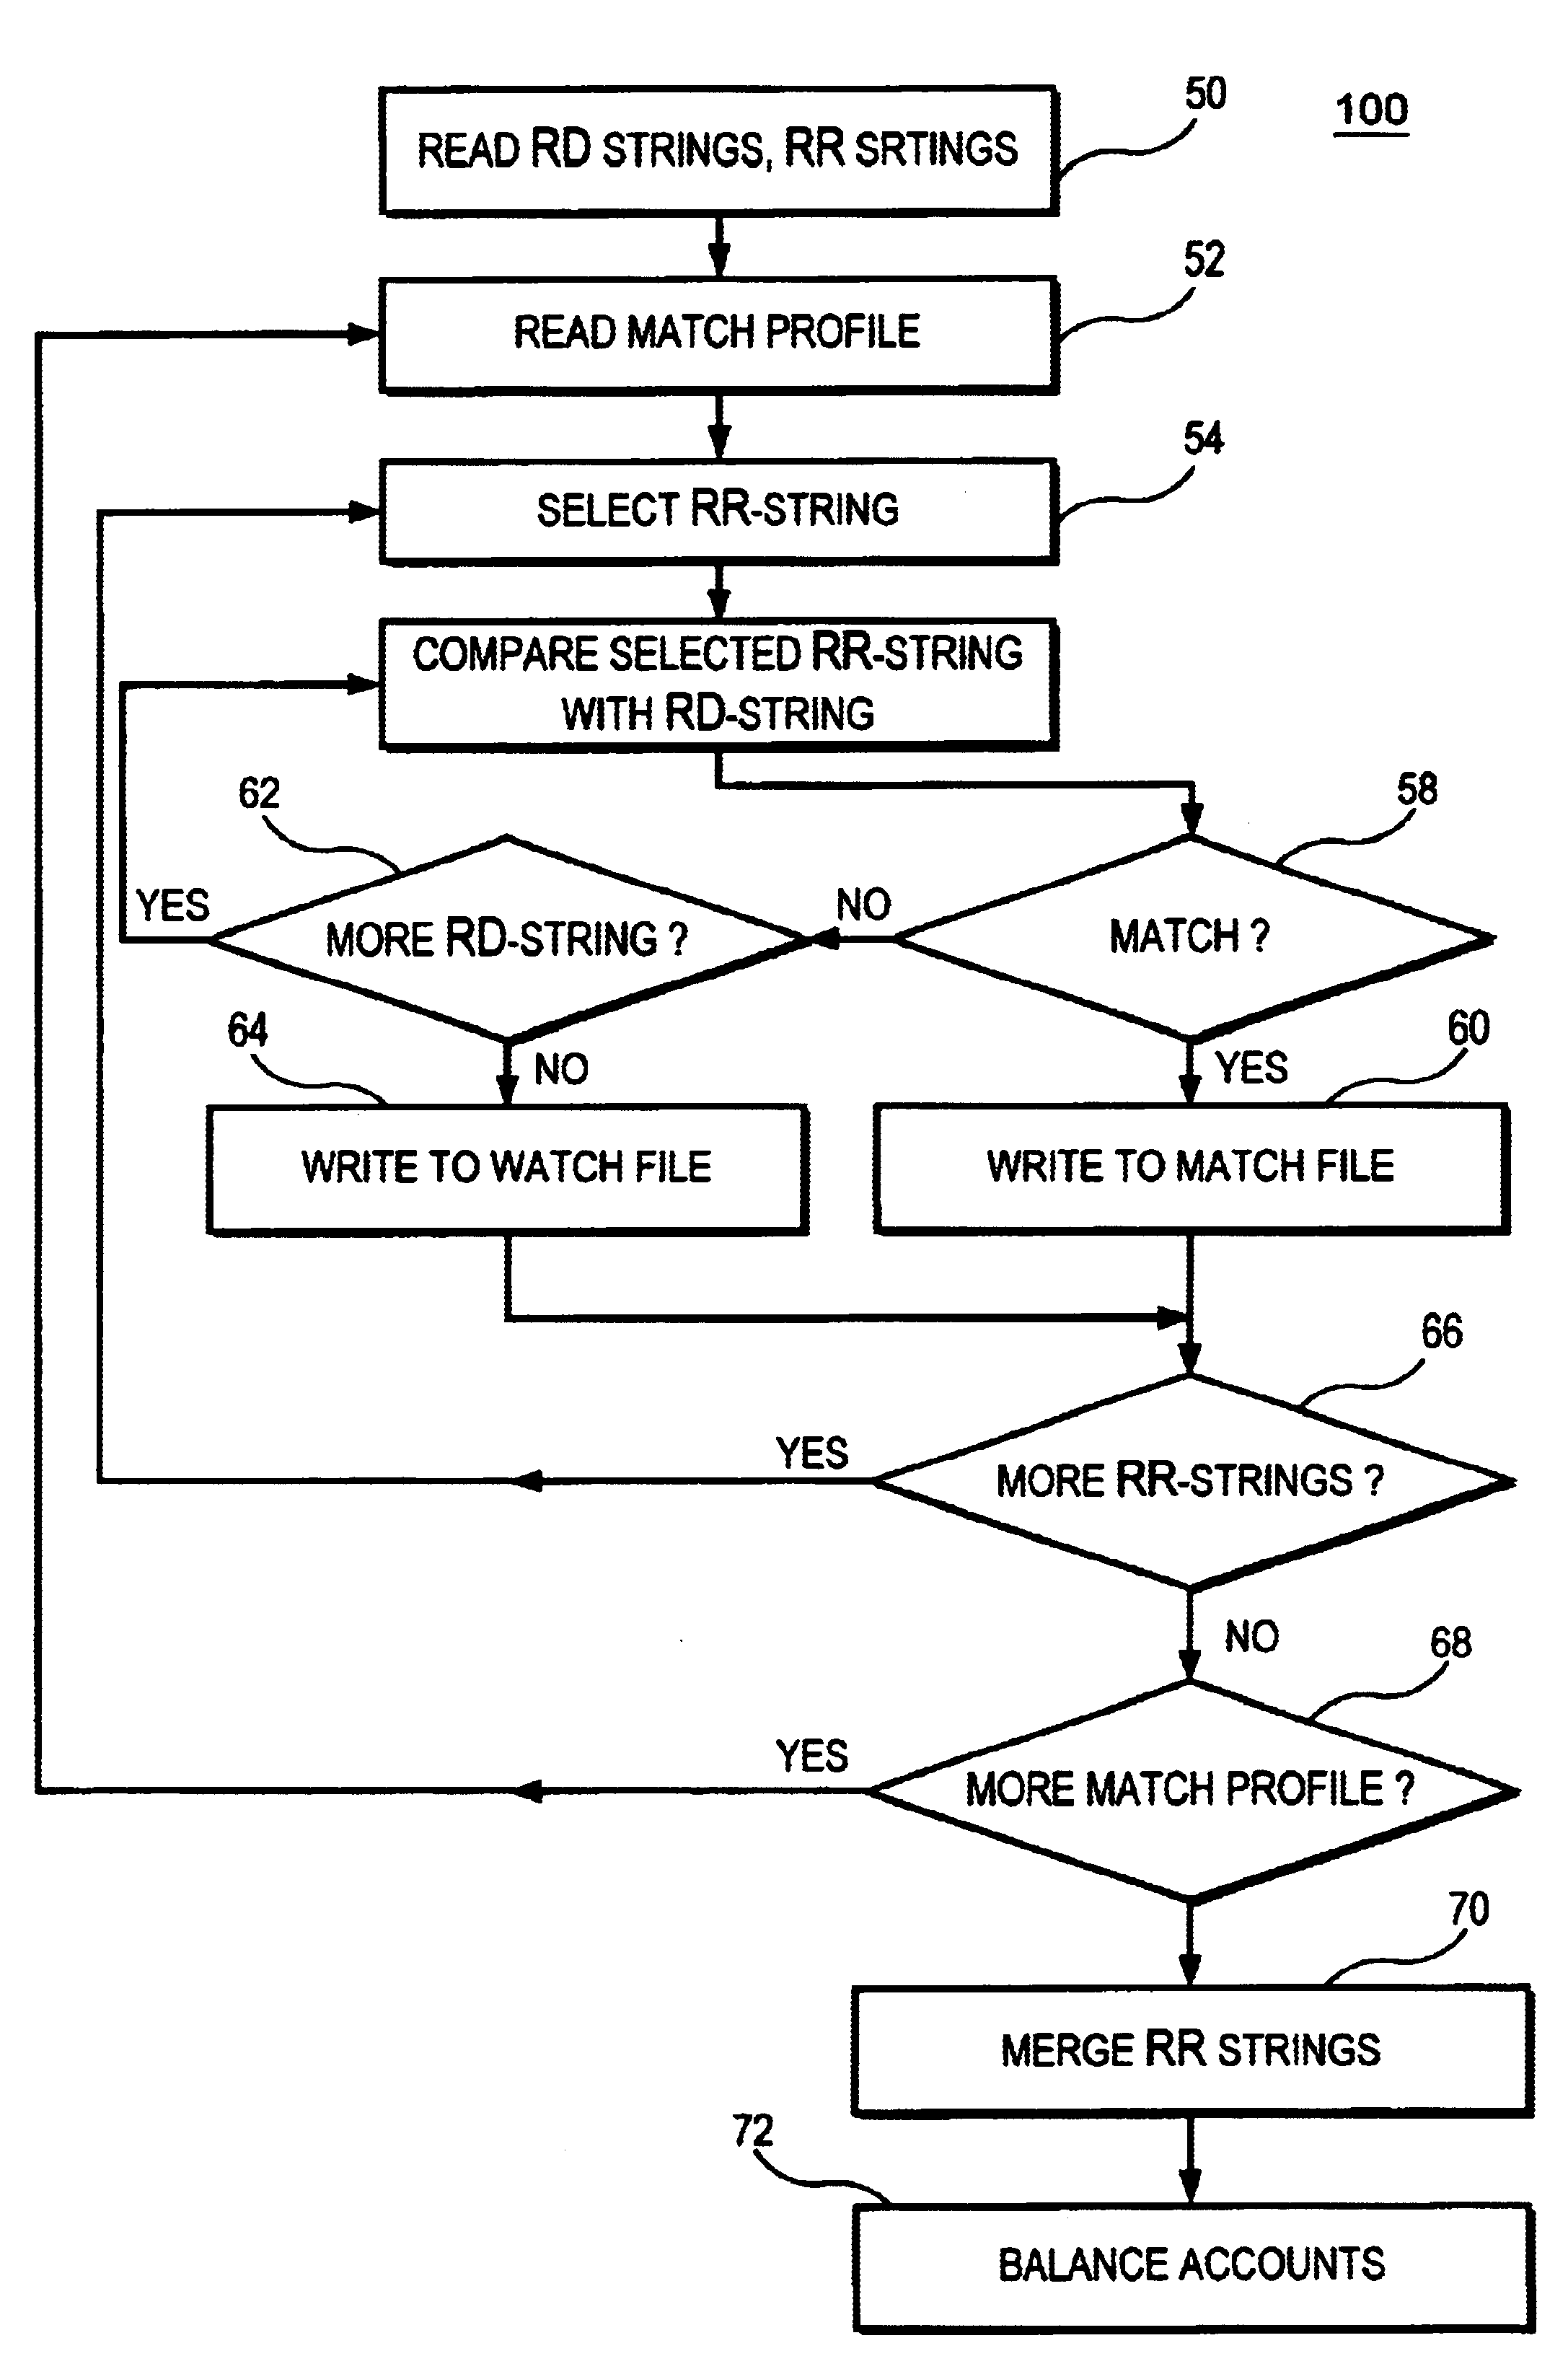 Multi-pass merge process for the check processing control system